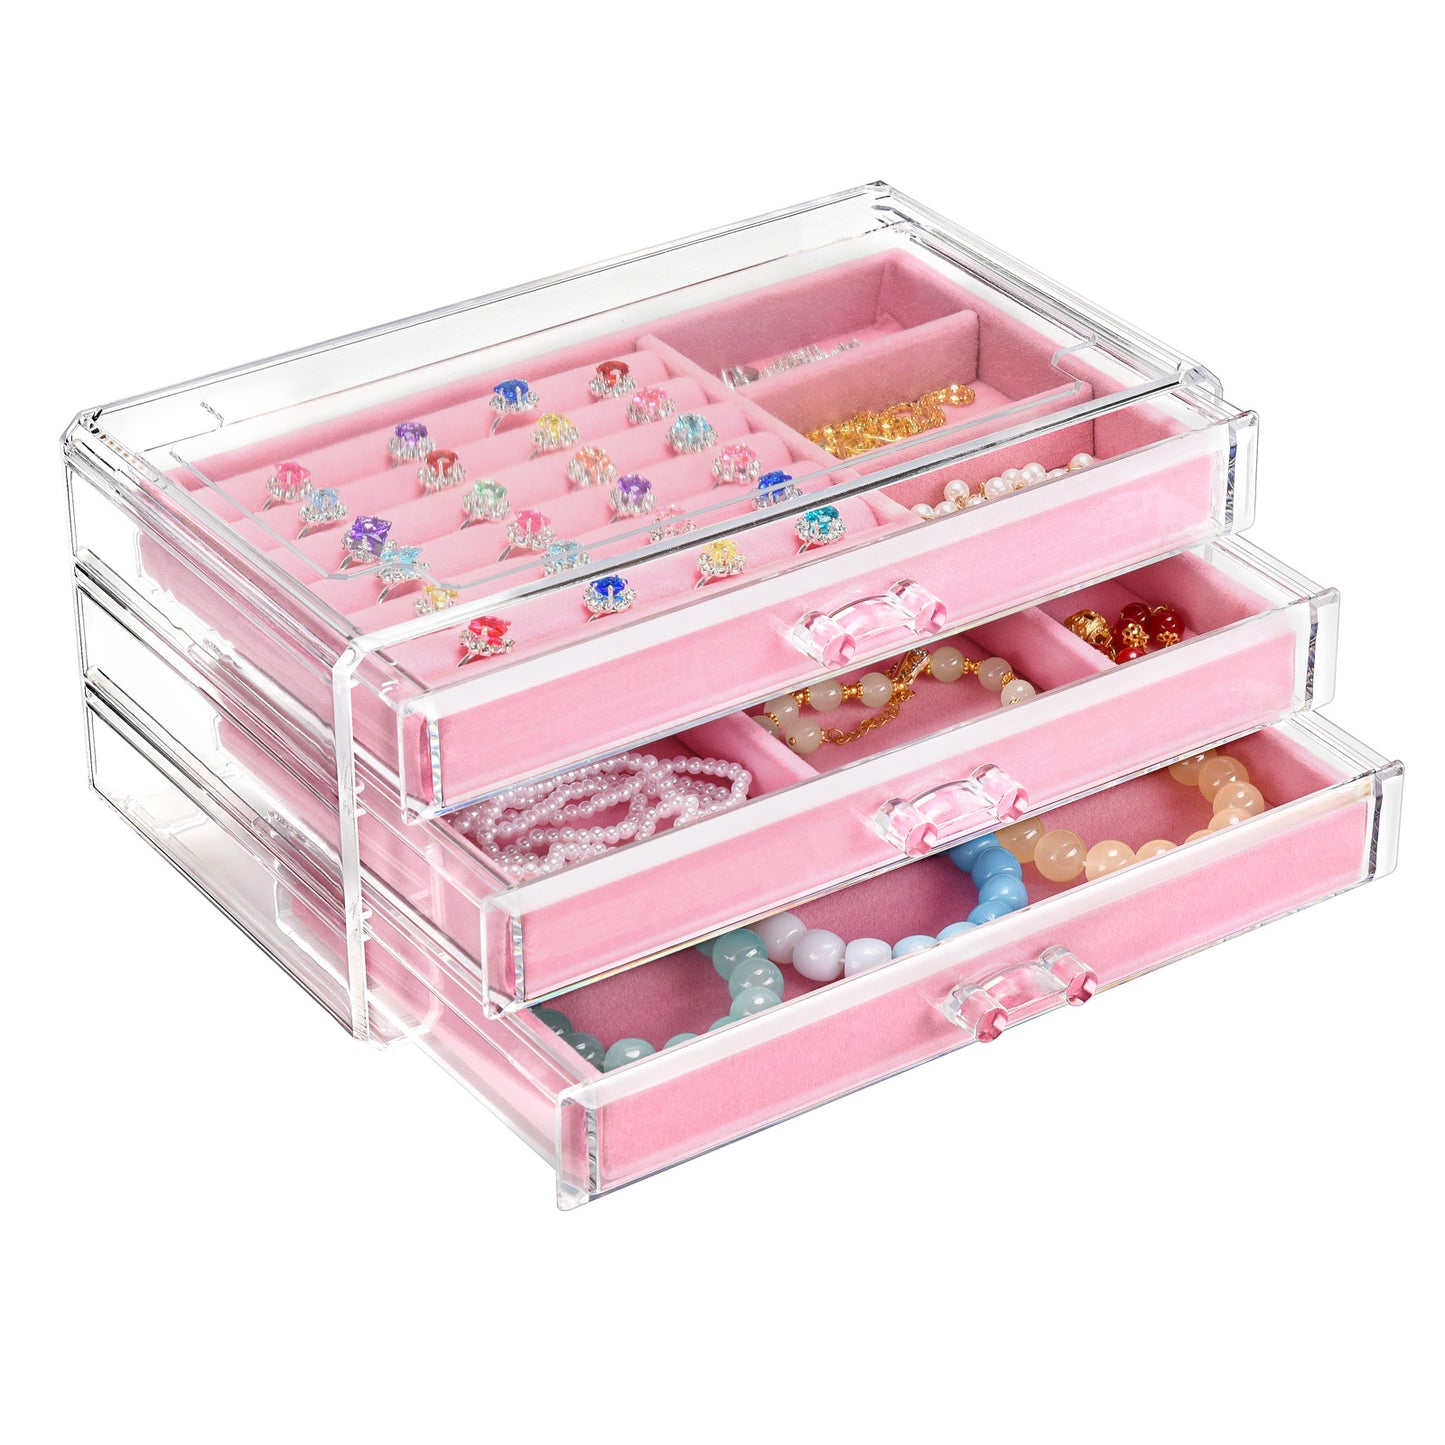 Cosmetic Acrylic Makeup Organizer - 3 Drawer Chest Pink Velvet